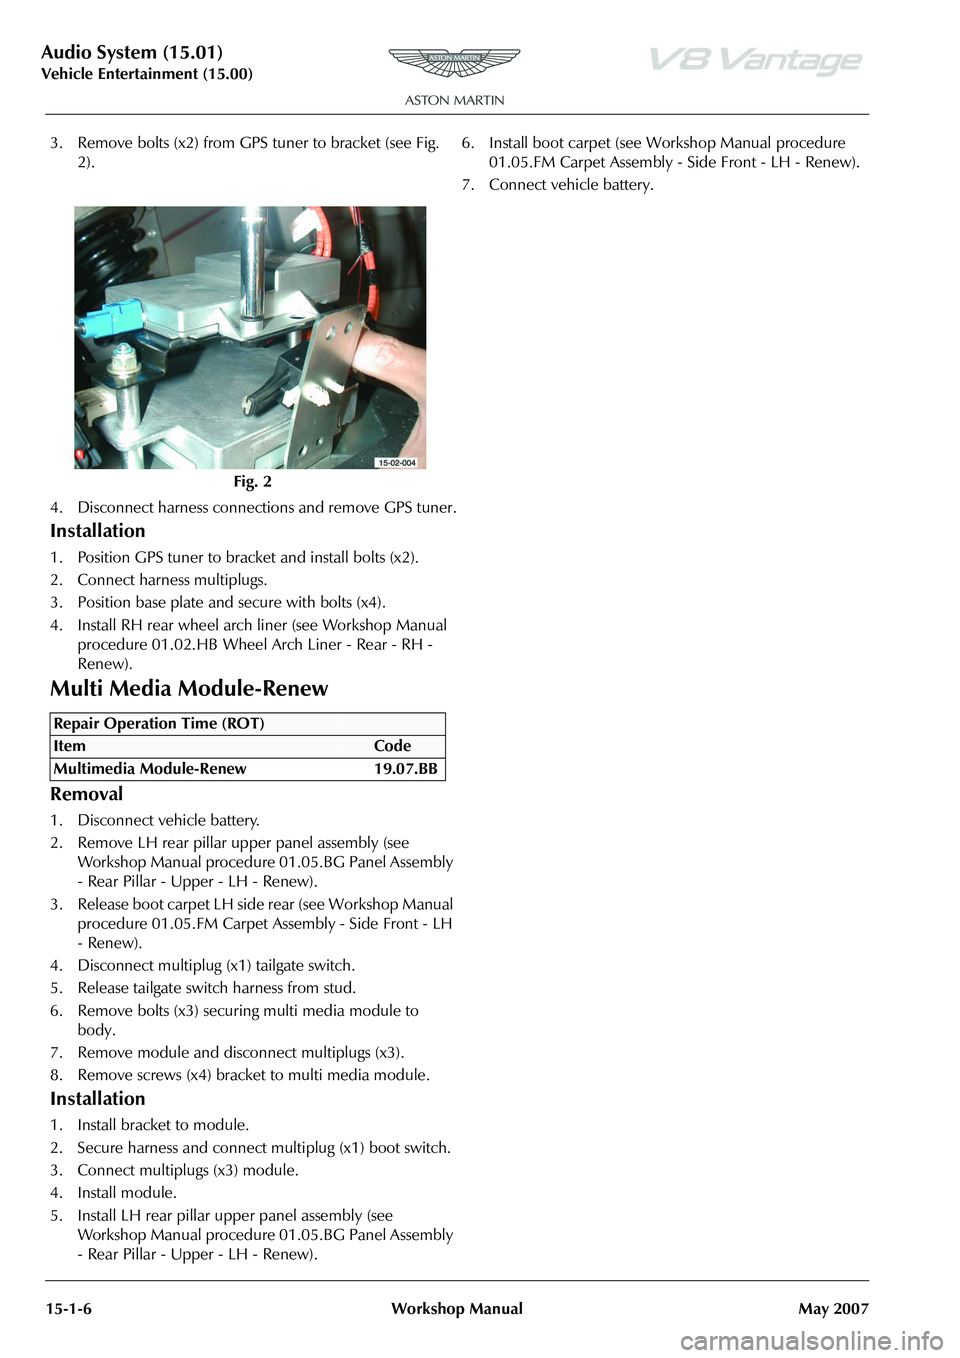 ASTON MARTIN V8 VANTAGE 2010  Workshop Manual Audio System (15.01)
Vehicle Entertainment (15.00)15-1-6 Workshop Manual May 2007
3. Remove bolts (x2) from GPS  tuner to bracket (see Fig. 
2).
4. Disconnect harness connections and remove GPS tuner.